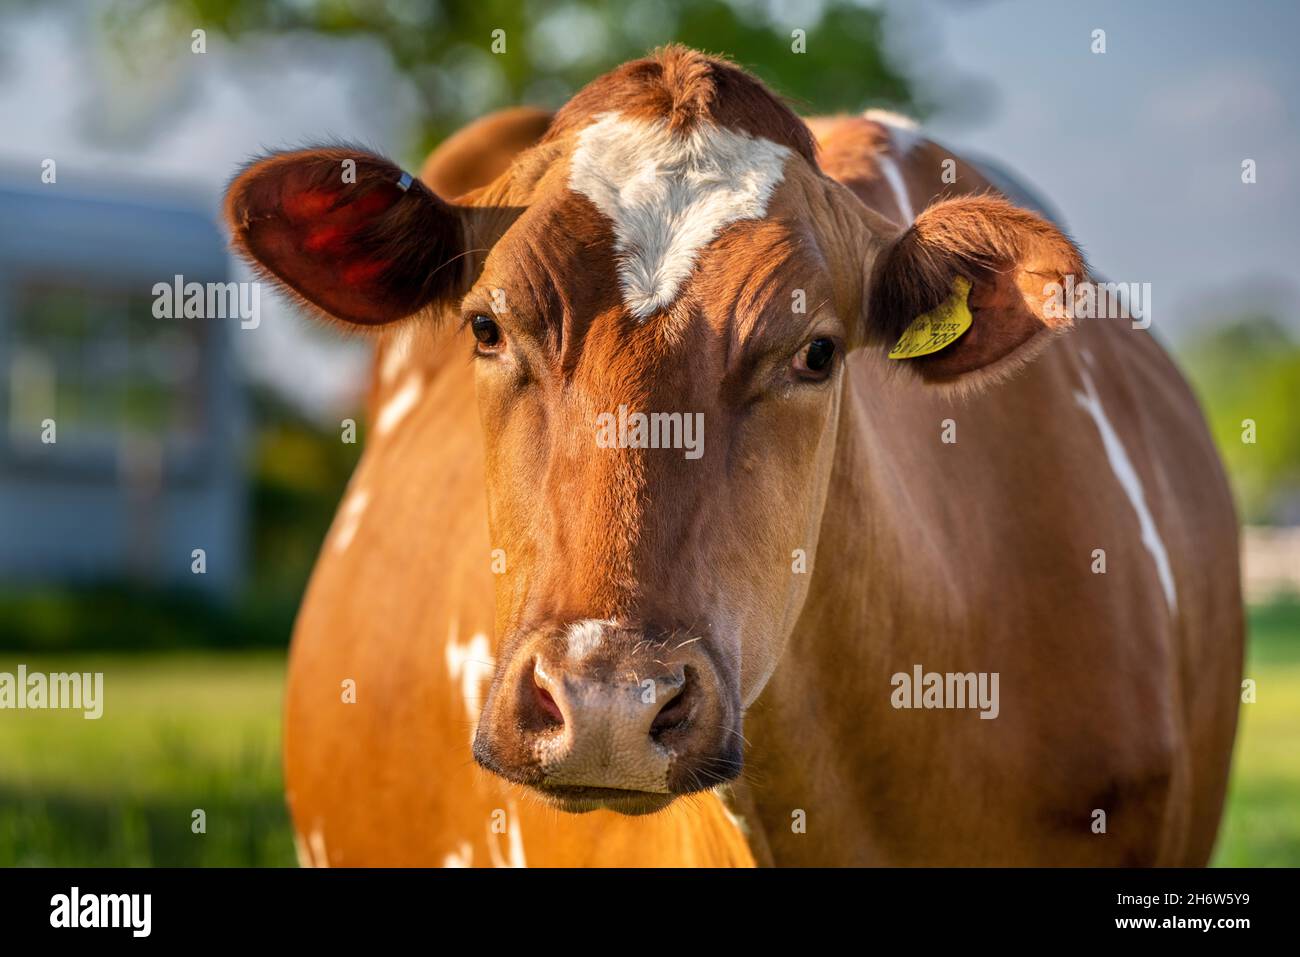 Ayrshire cattle are a breed of dairy cattle from Ayrshire in southwest Scotland. Stock Photo